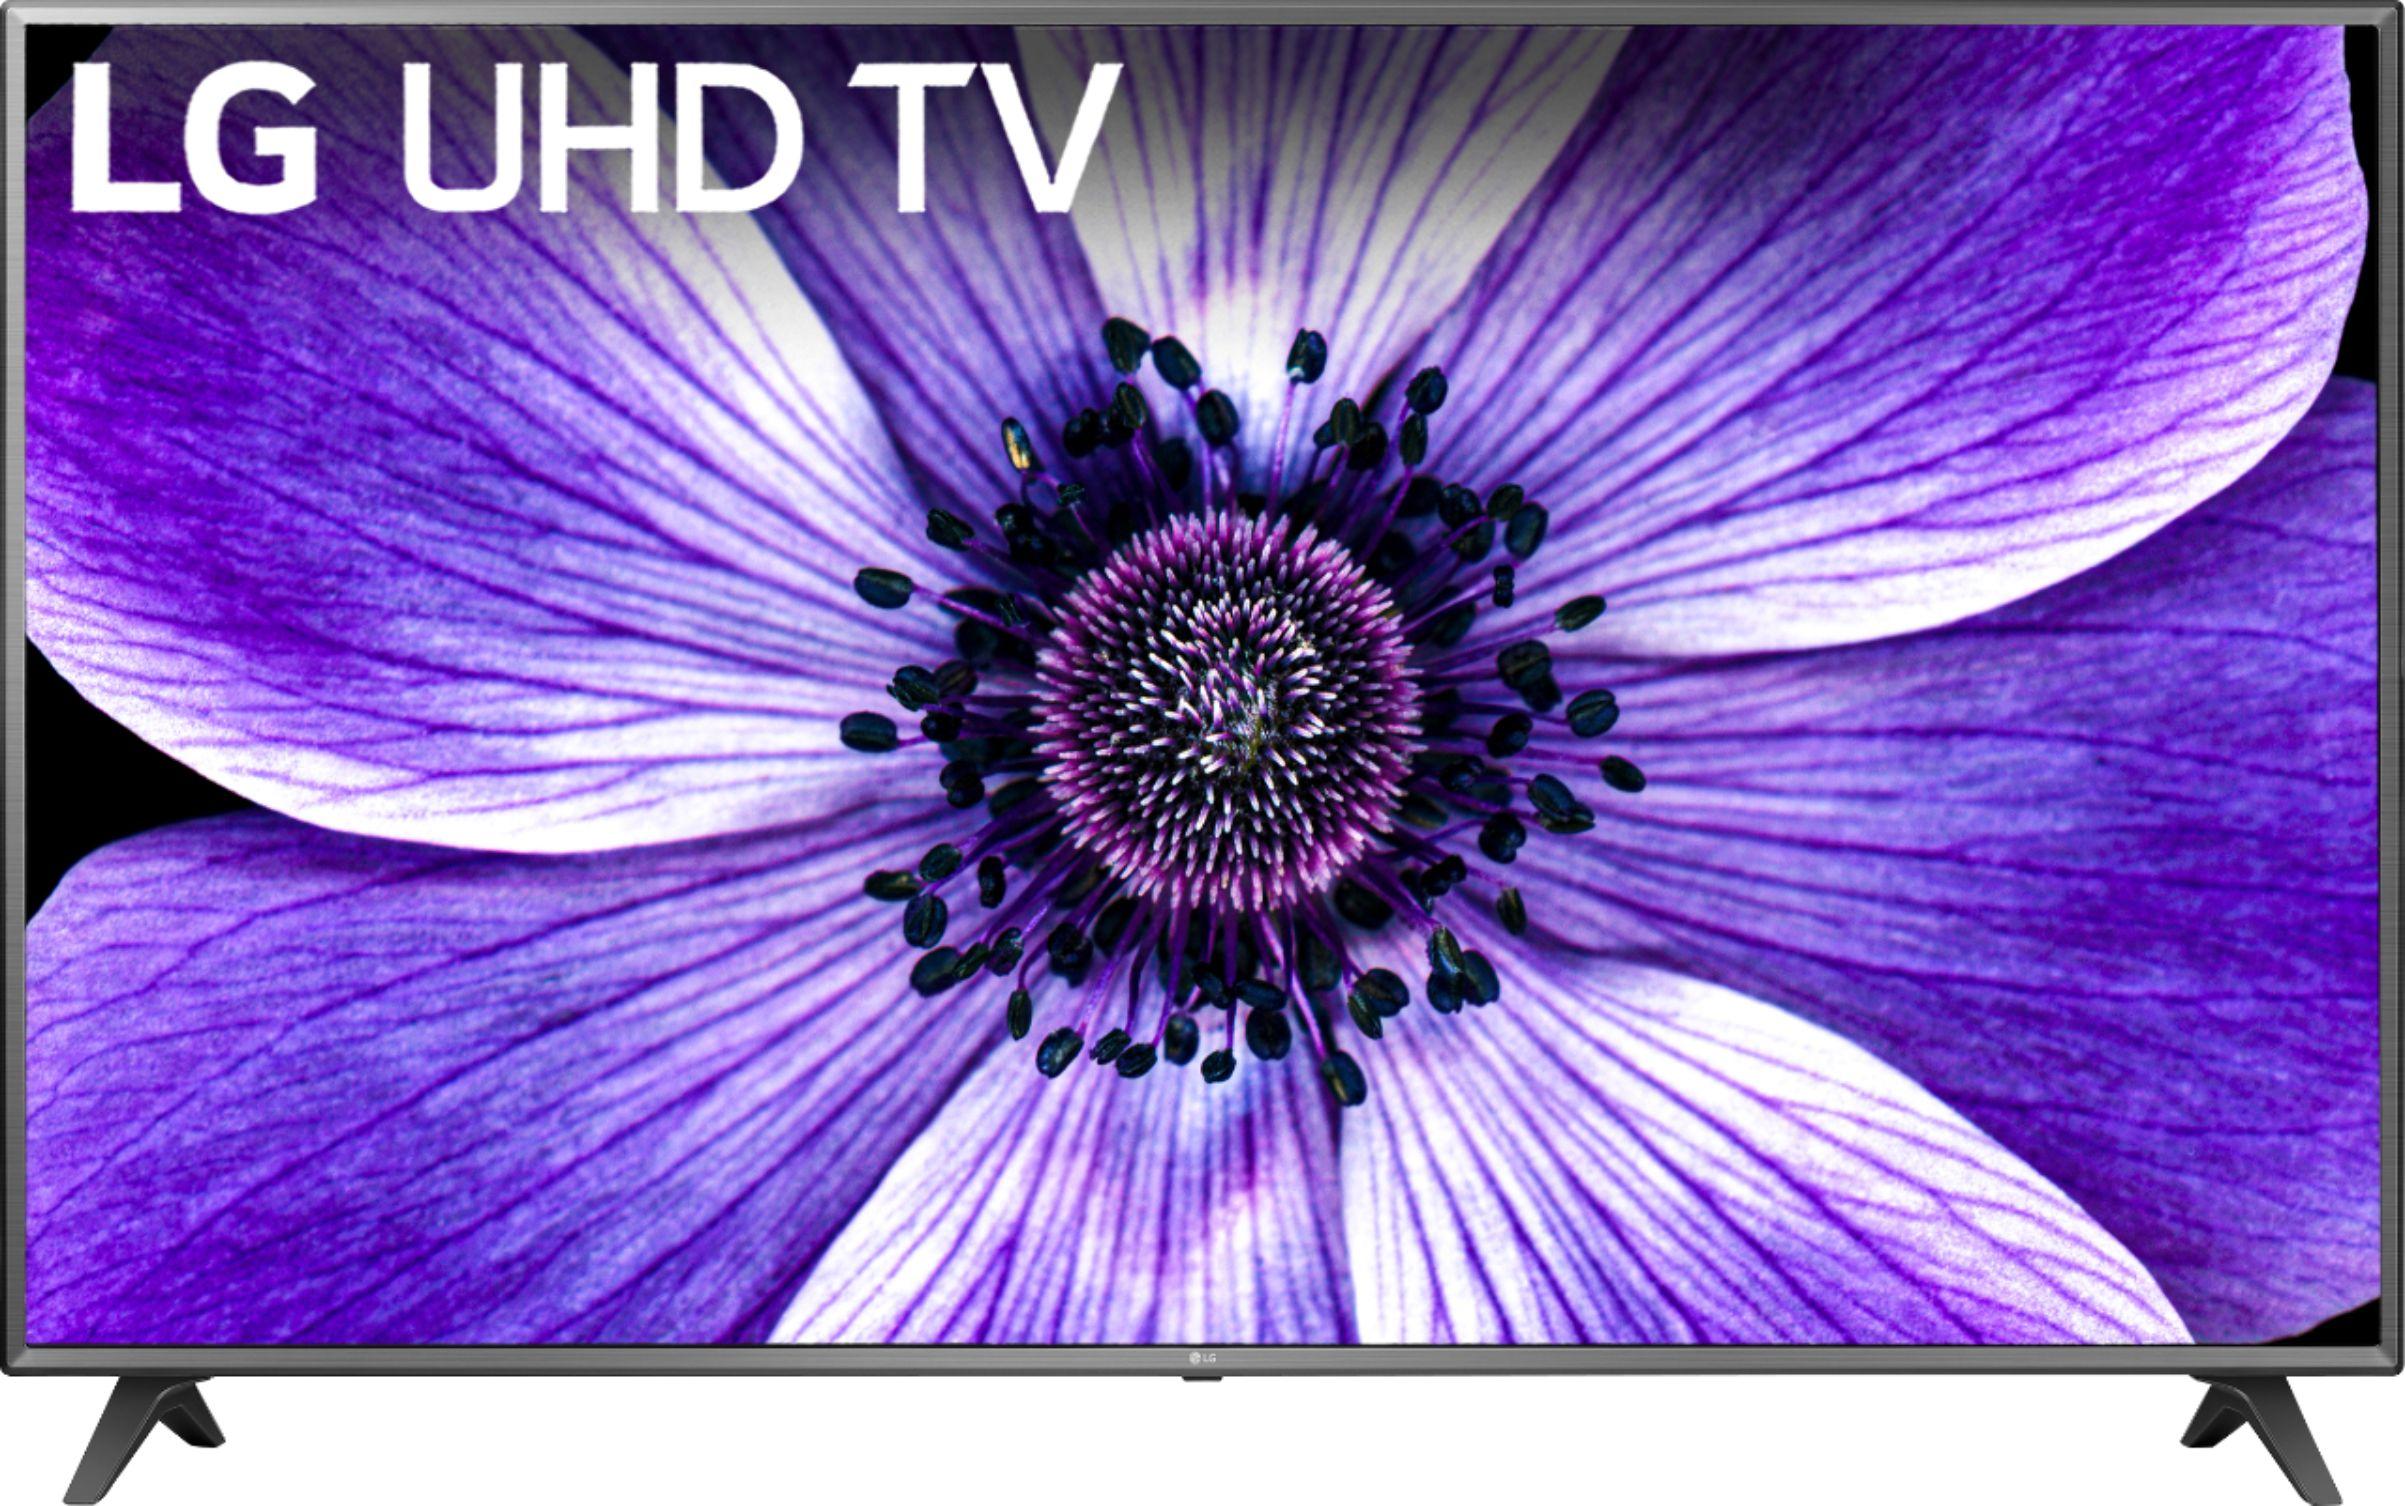 LG 75in Class UN6970 Series LED 4K UHD Smart webOS TV for $649.99 Shipped